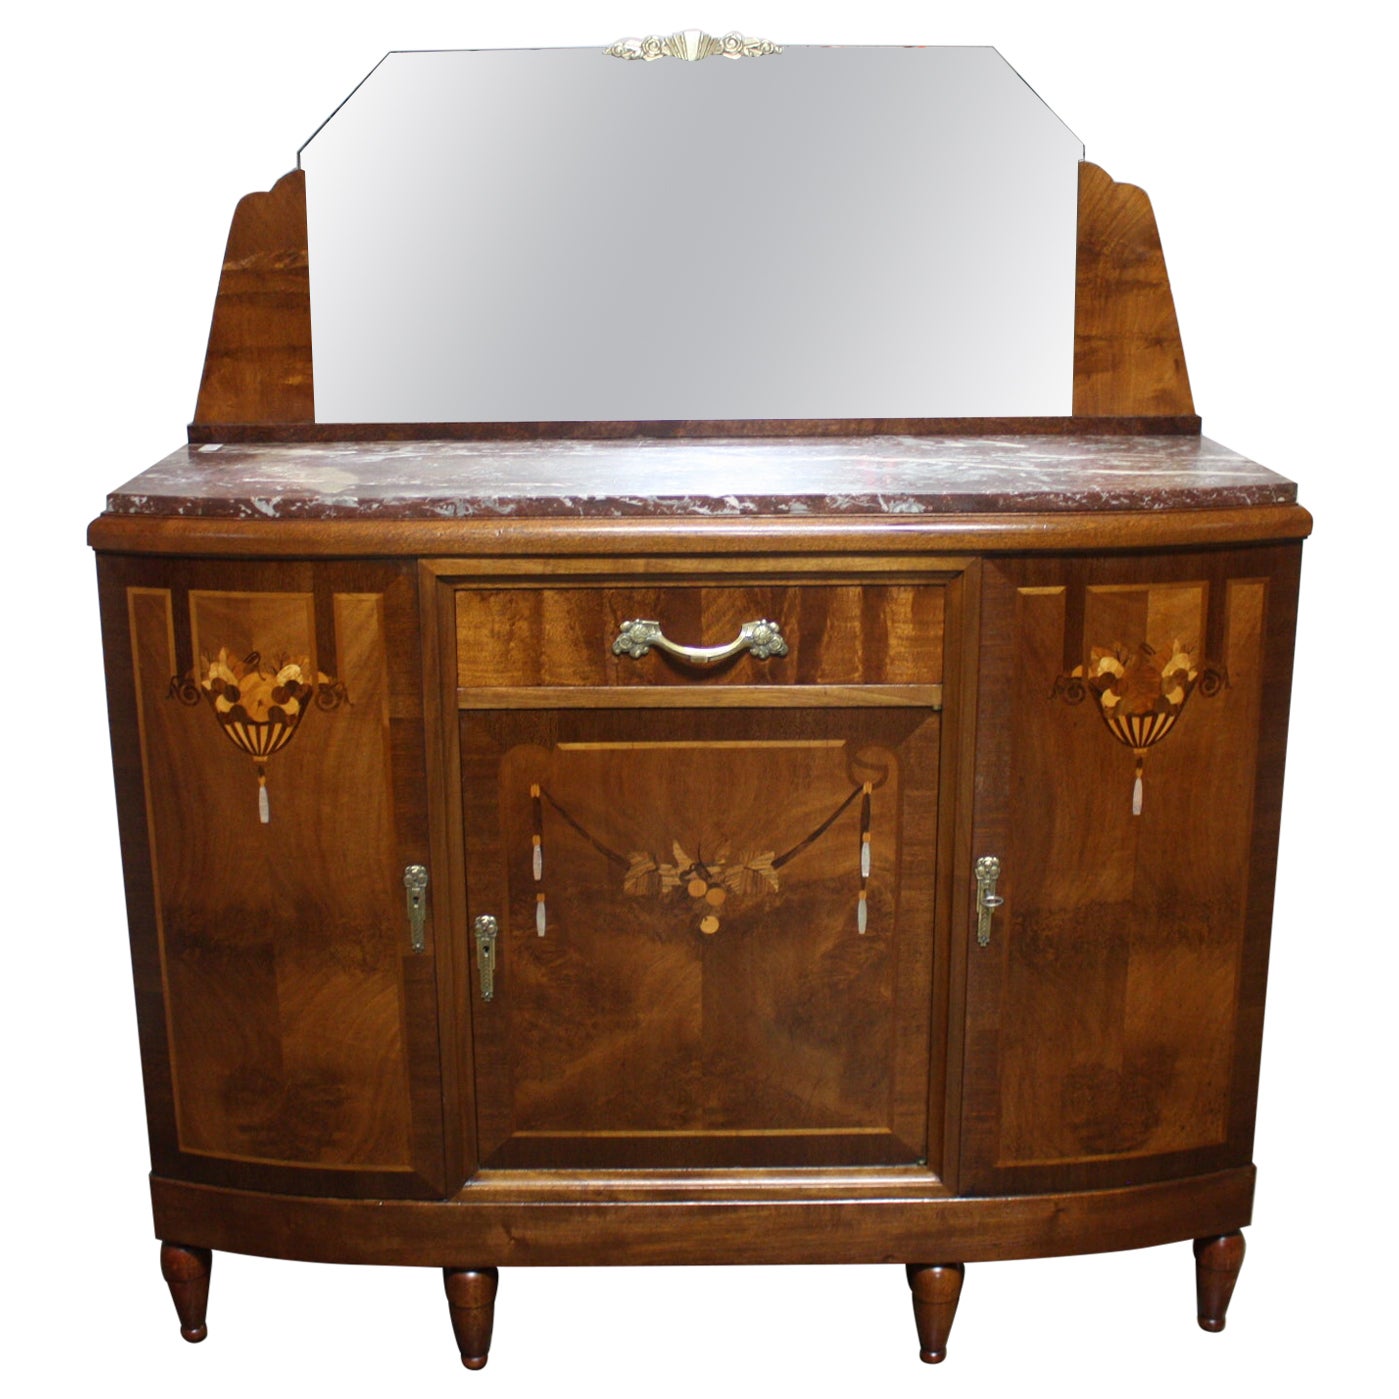 French Art Deco Sideboard